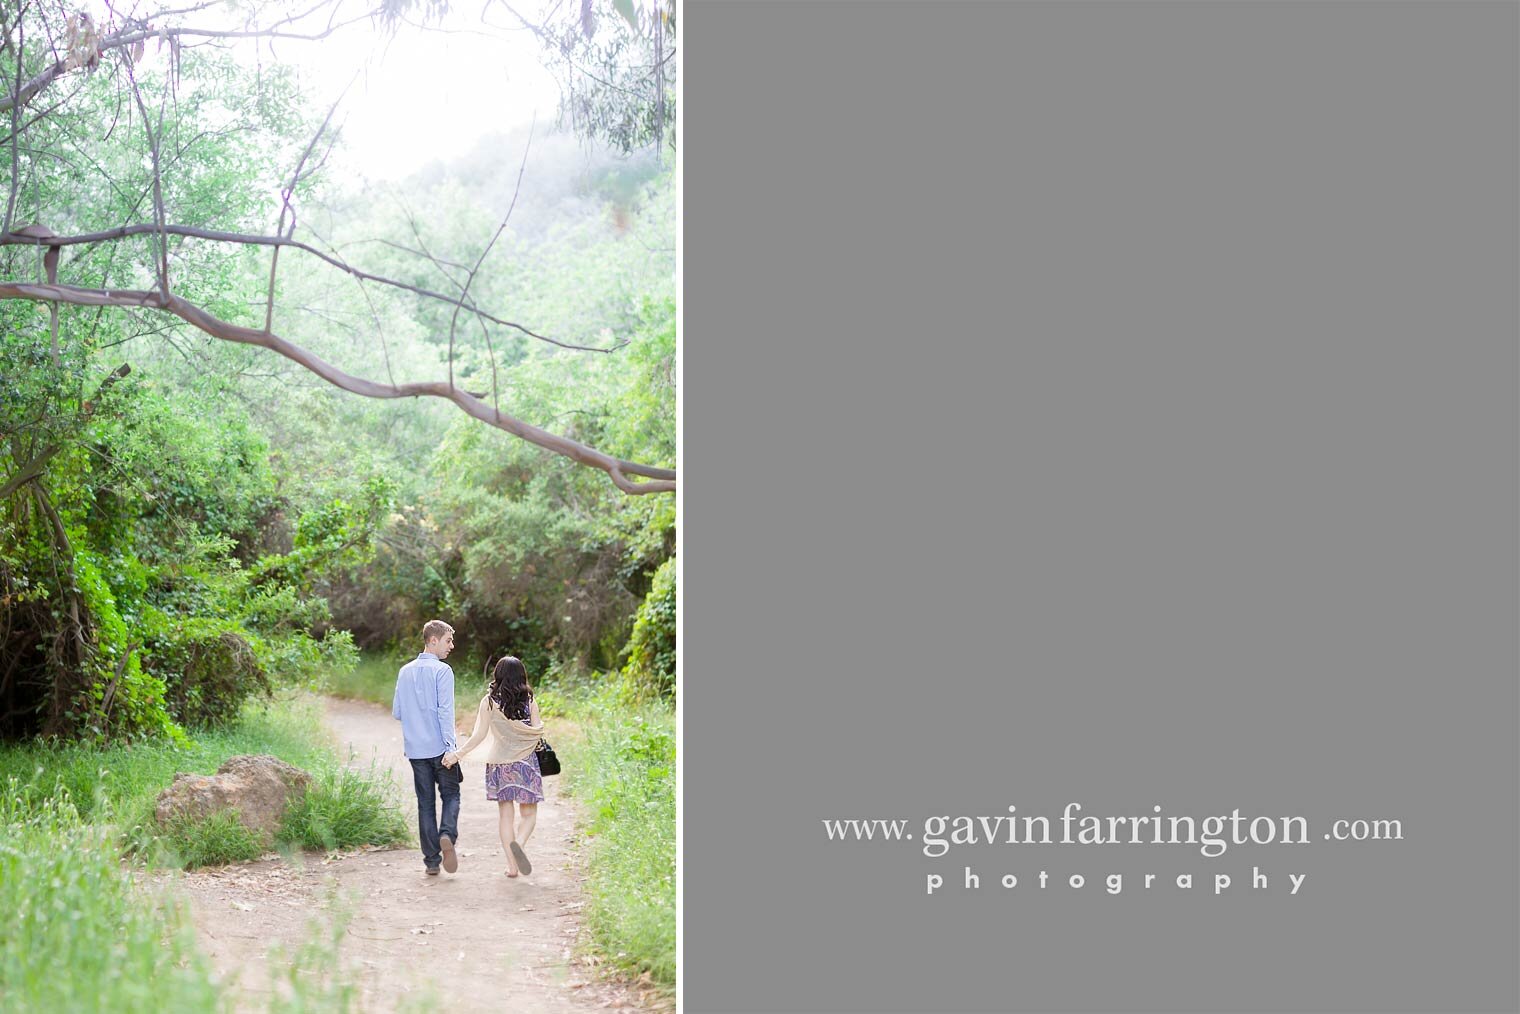 Destination engagement photographs in Temescal Park and Pacific Palisades in Los Angeles, California.